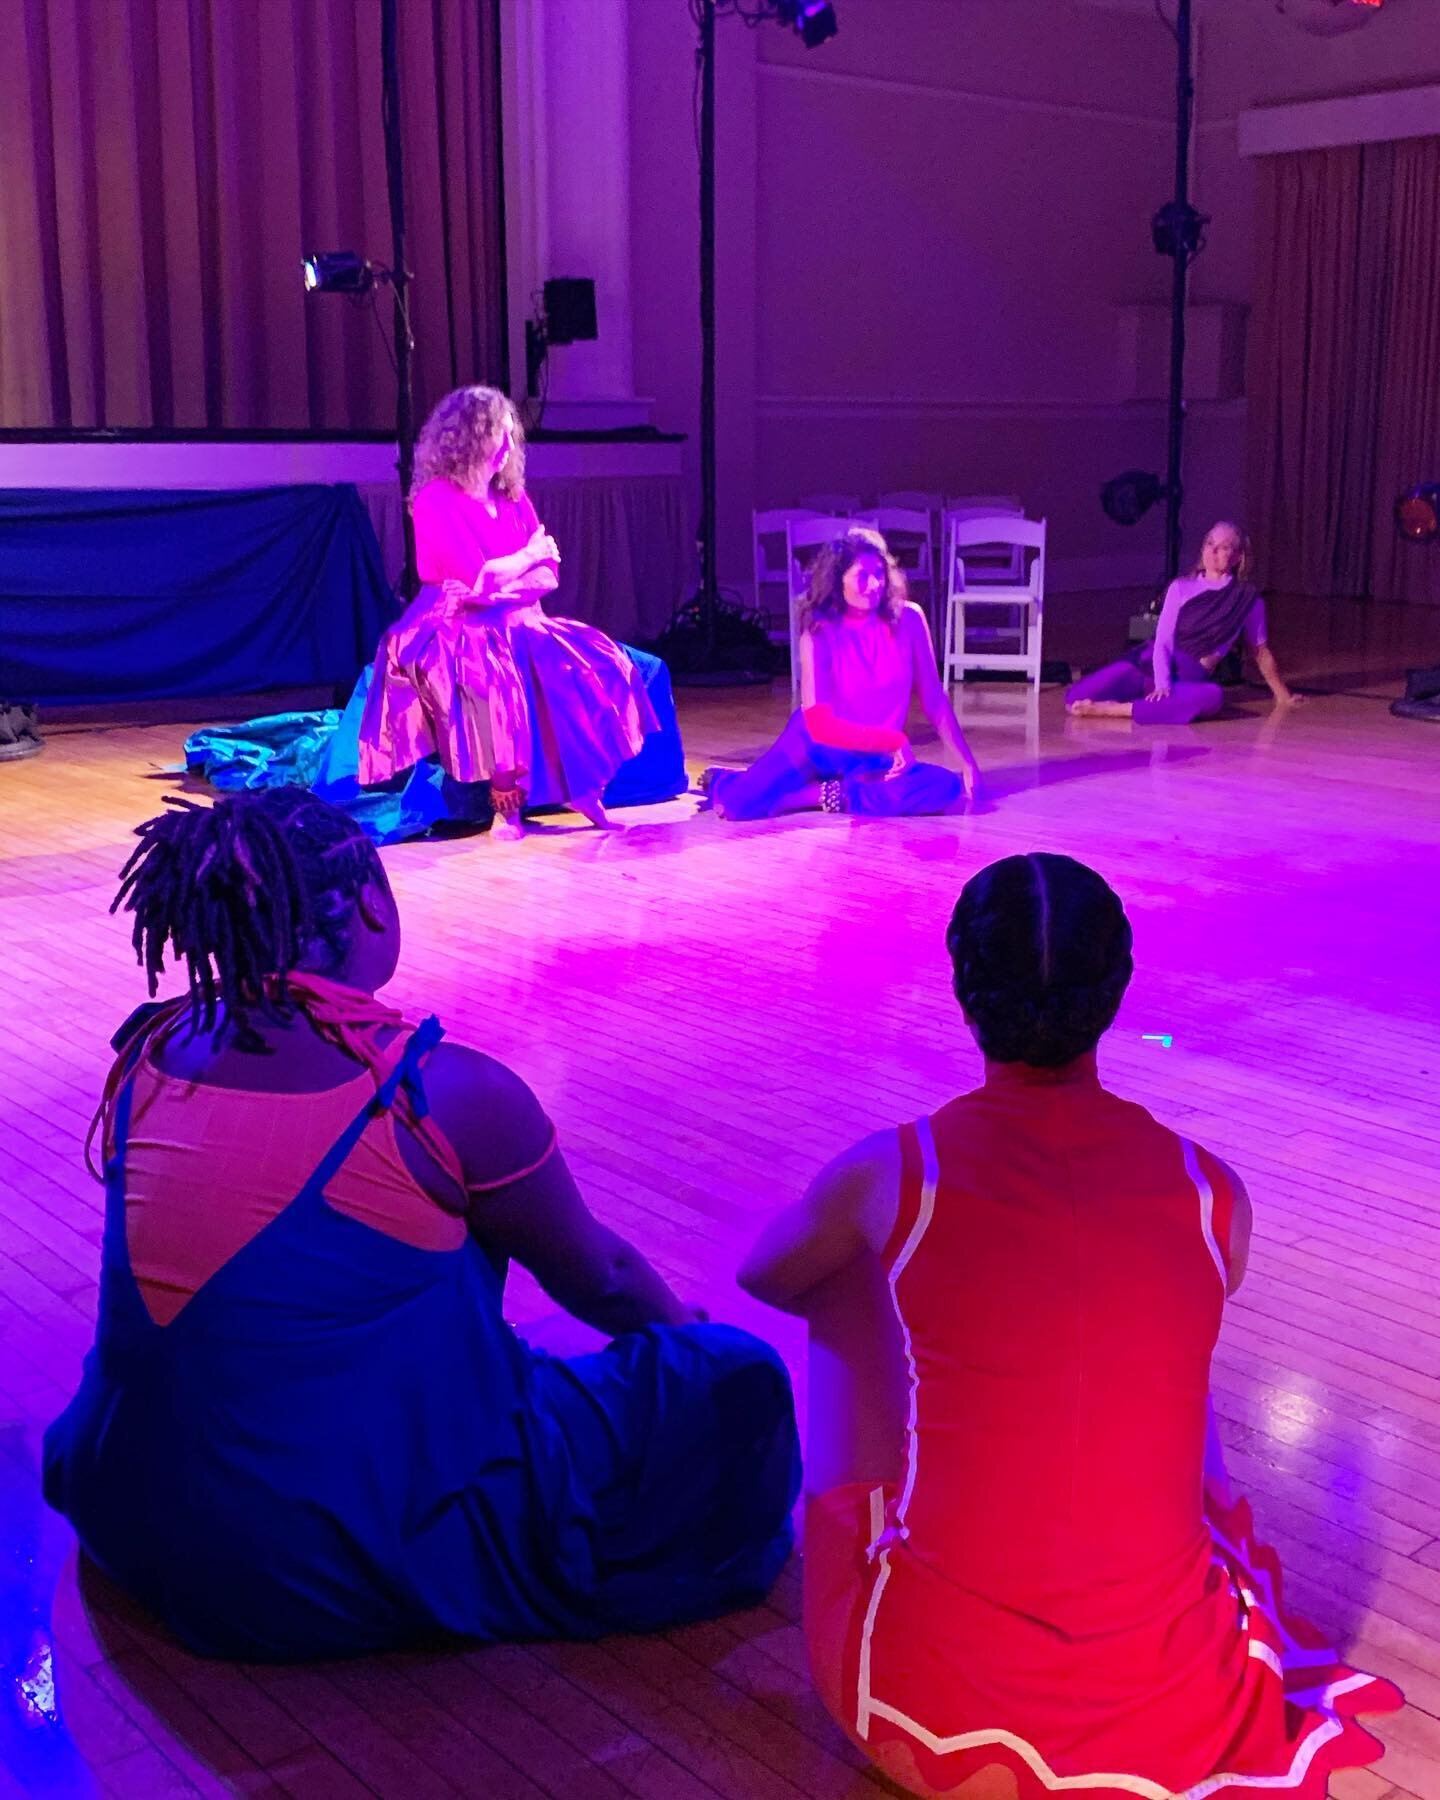 Opening Night Tonight!
Through the Eyes of My Feet
 
It&rsquo;s a celebration of a woman&rsquo;s grace at any age. 
Created by women and non-binary artists, about women, and dedicated to all women, non-binary and femmes.

3 Nights Only! Admission Fre